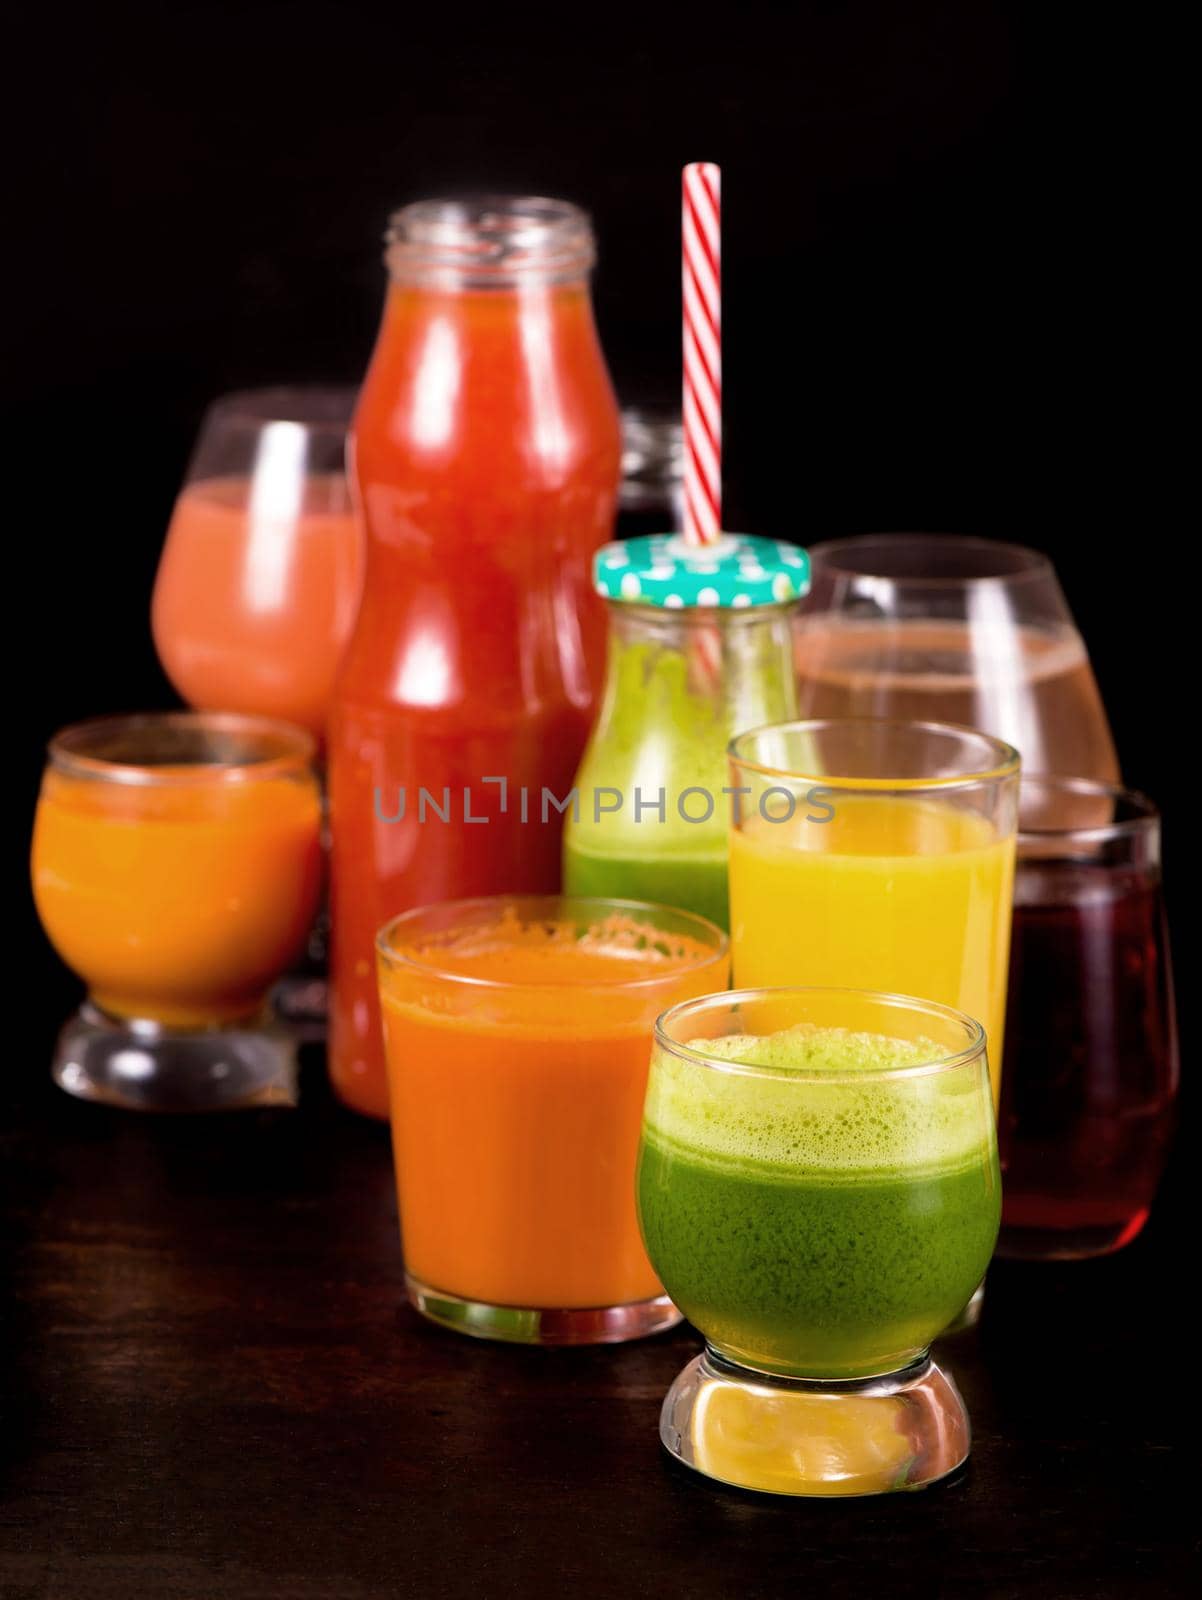 Various freshly squeezed fruits and vegetables juices